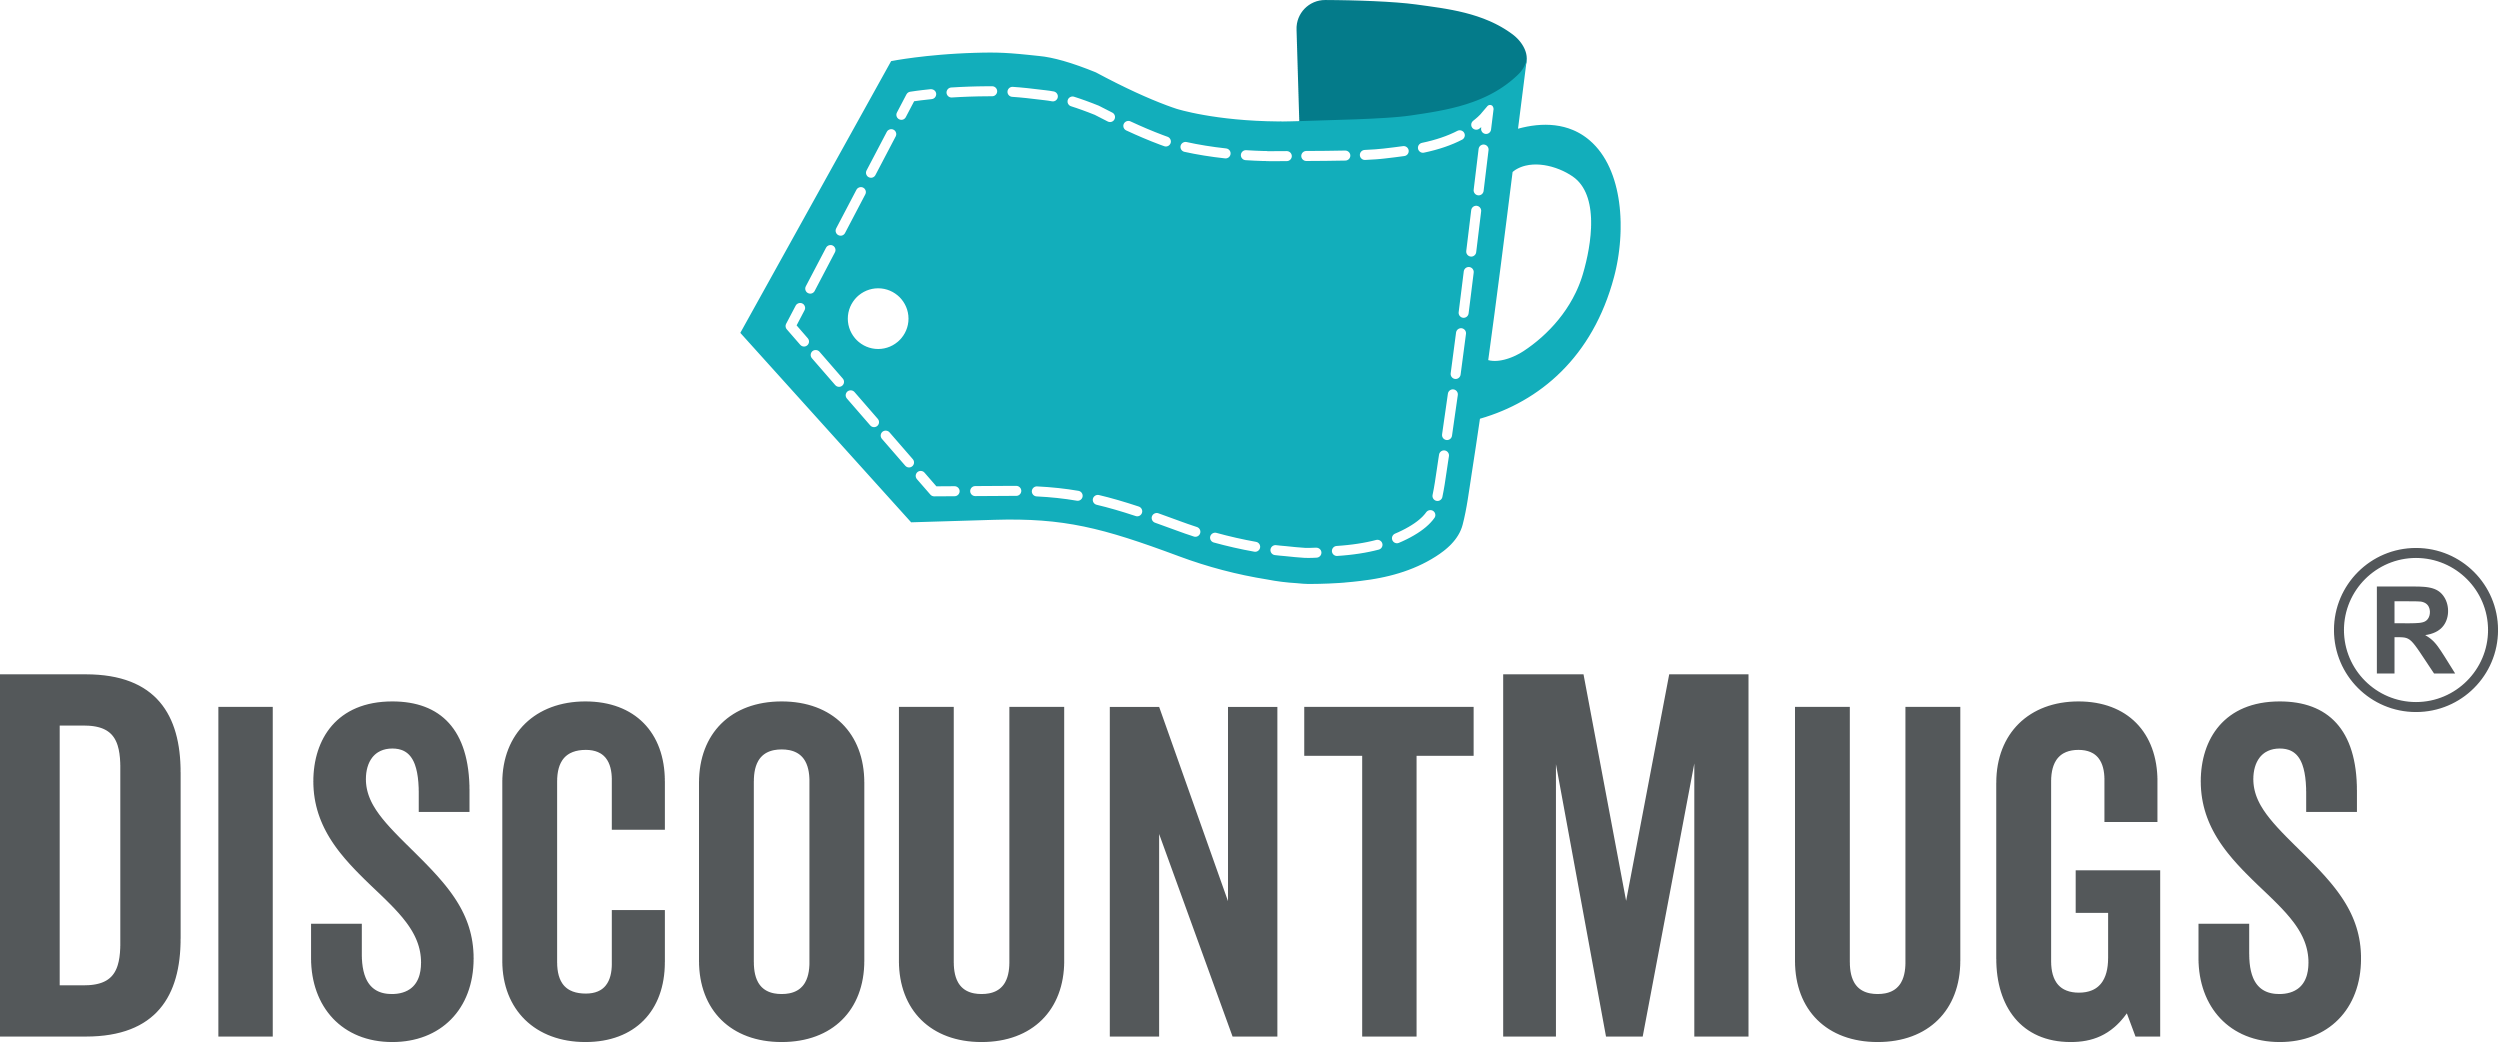 30 Off Discount Mugs Promo Codes August 2021 thecoupons.us